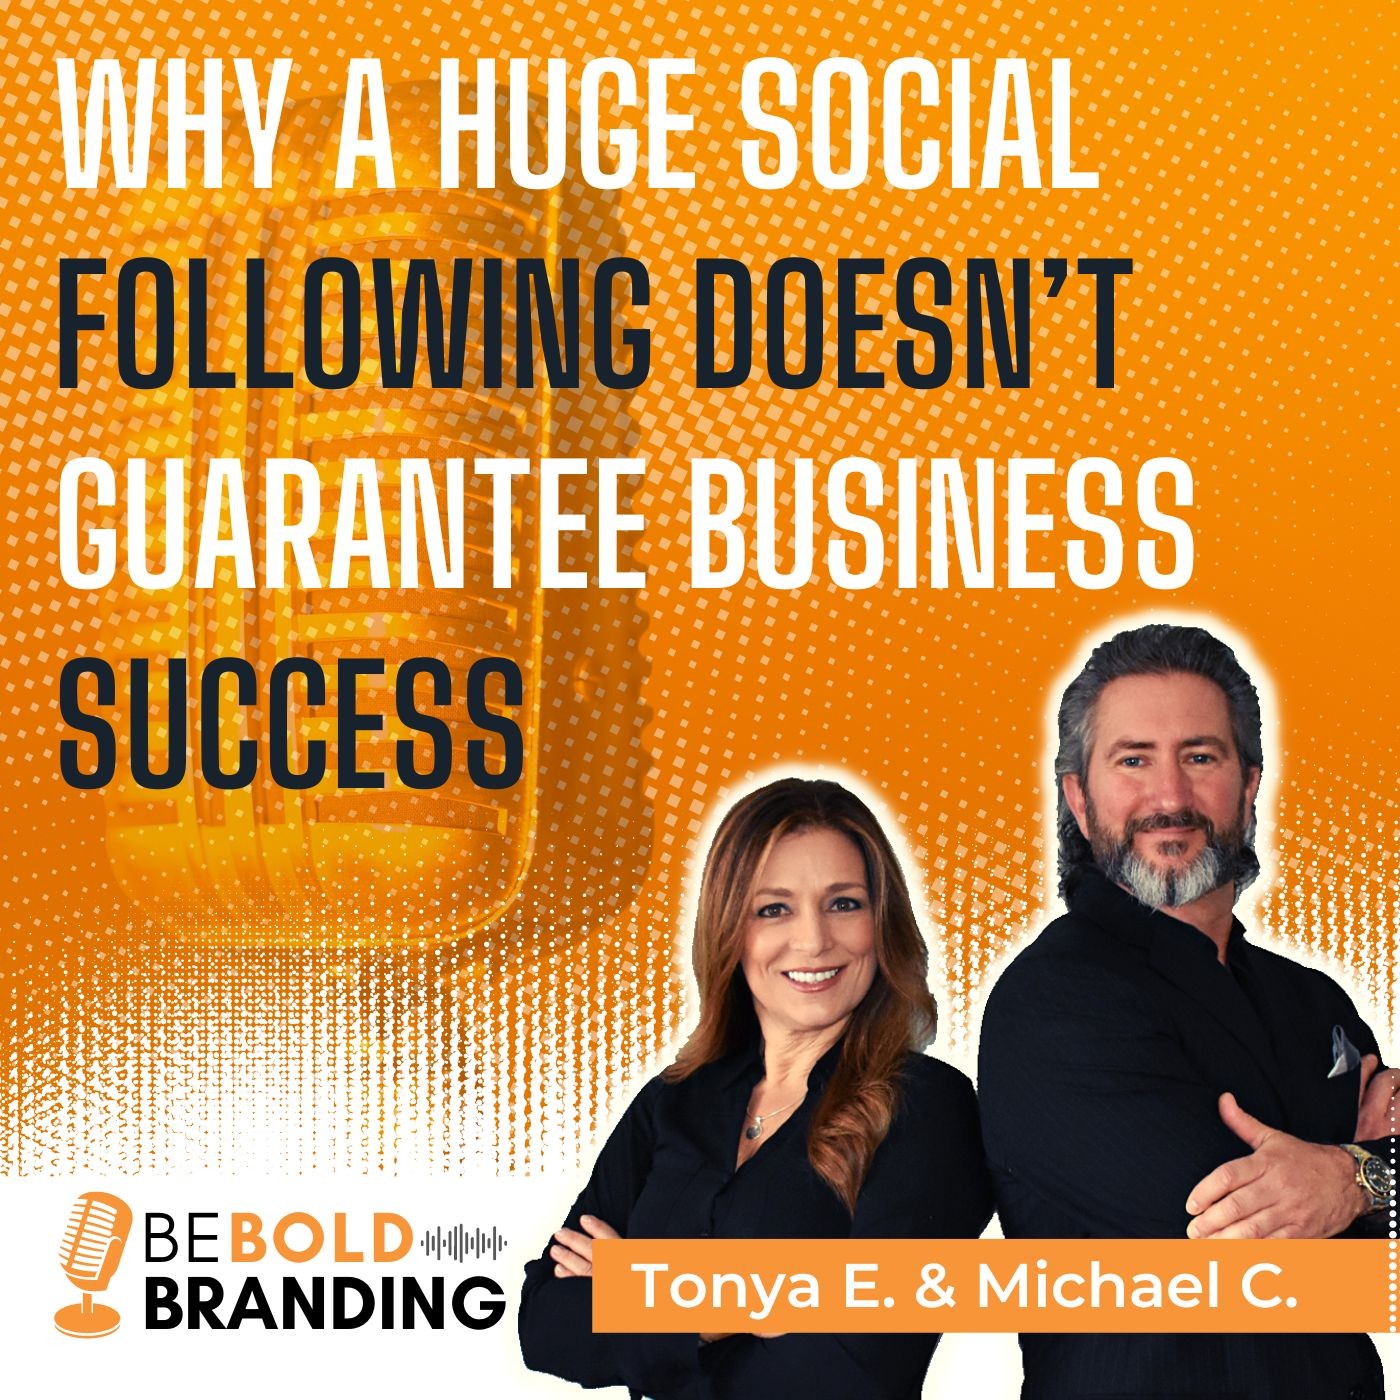 Why A Huge Social Following Doesn’t Guarantee Business Success